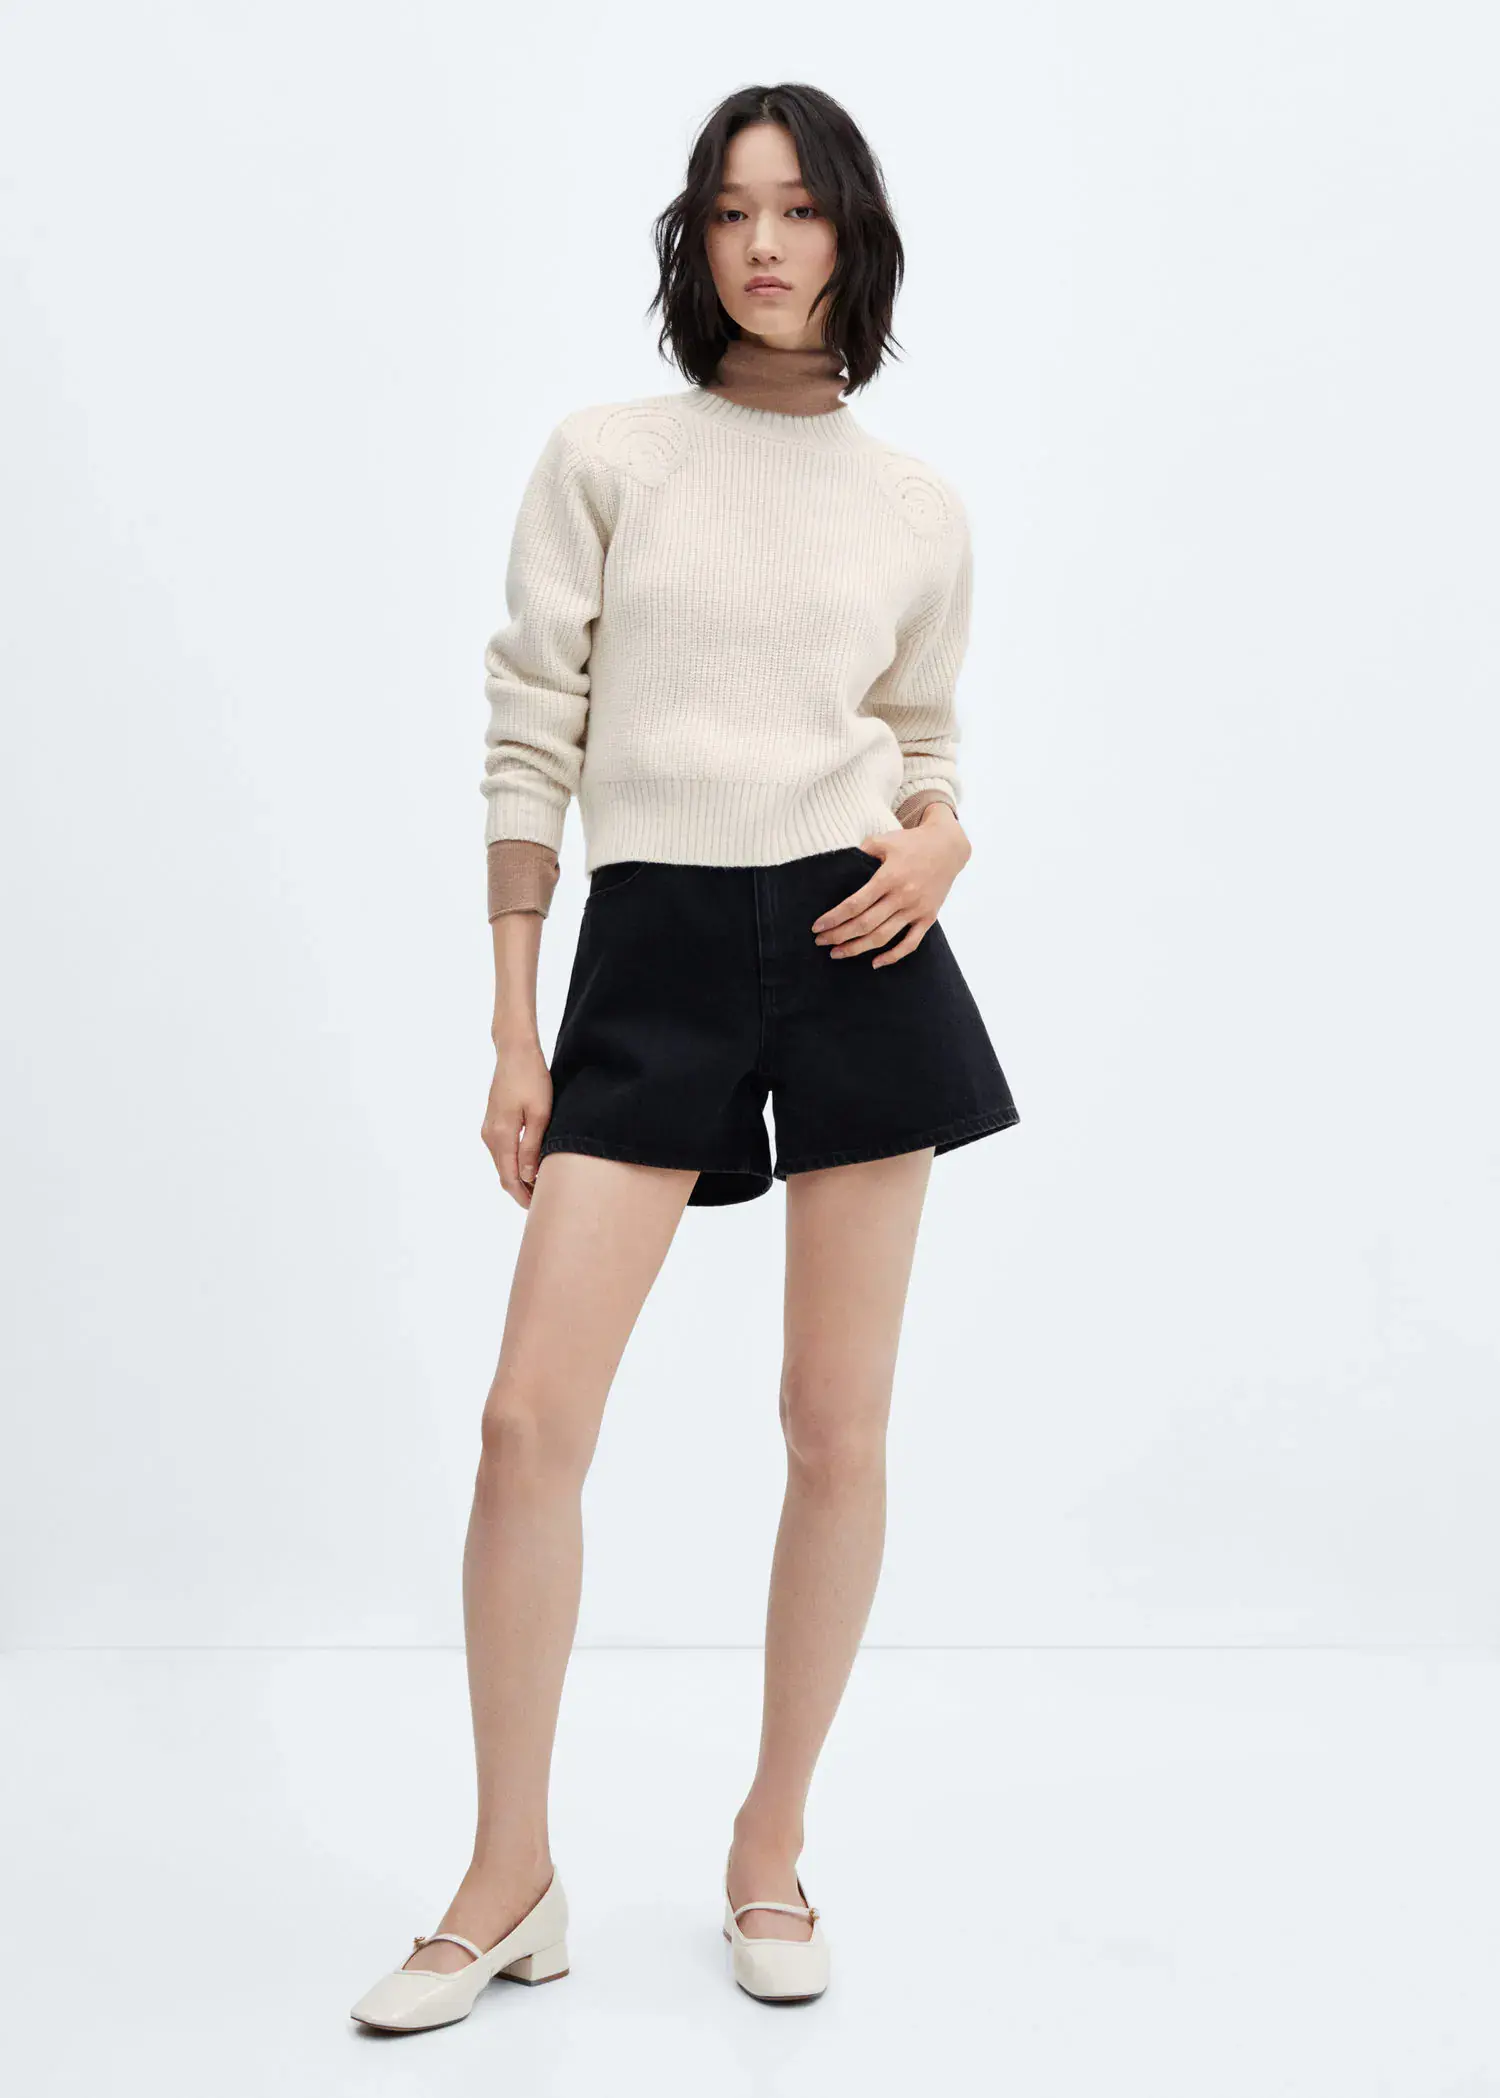 Mango Perkins neck sweater with shoulder detail. 2